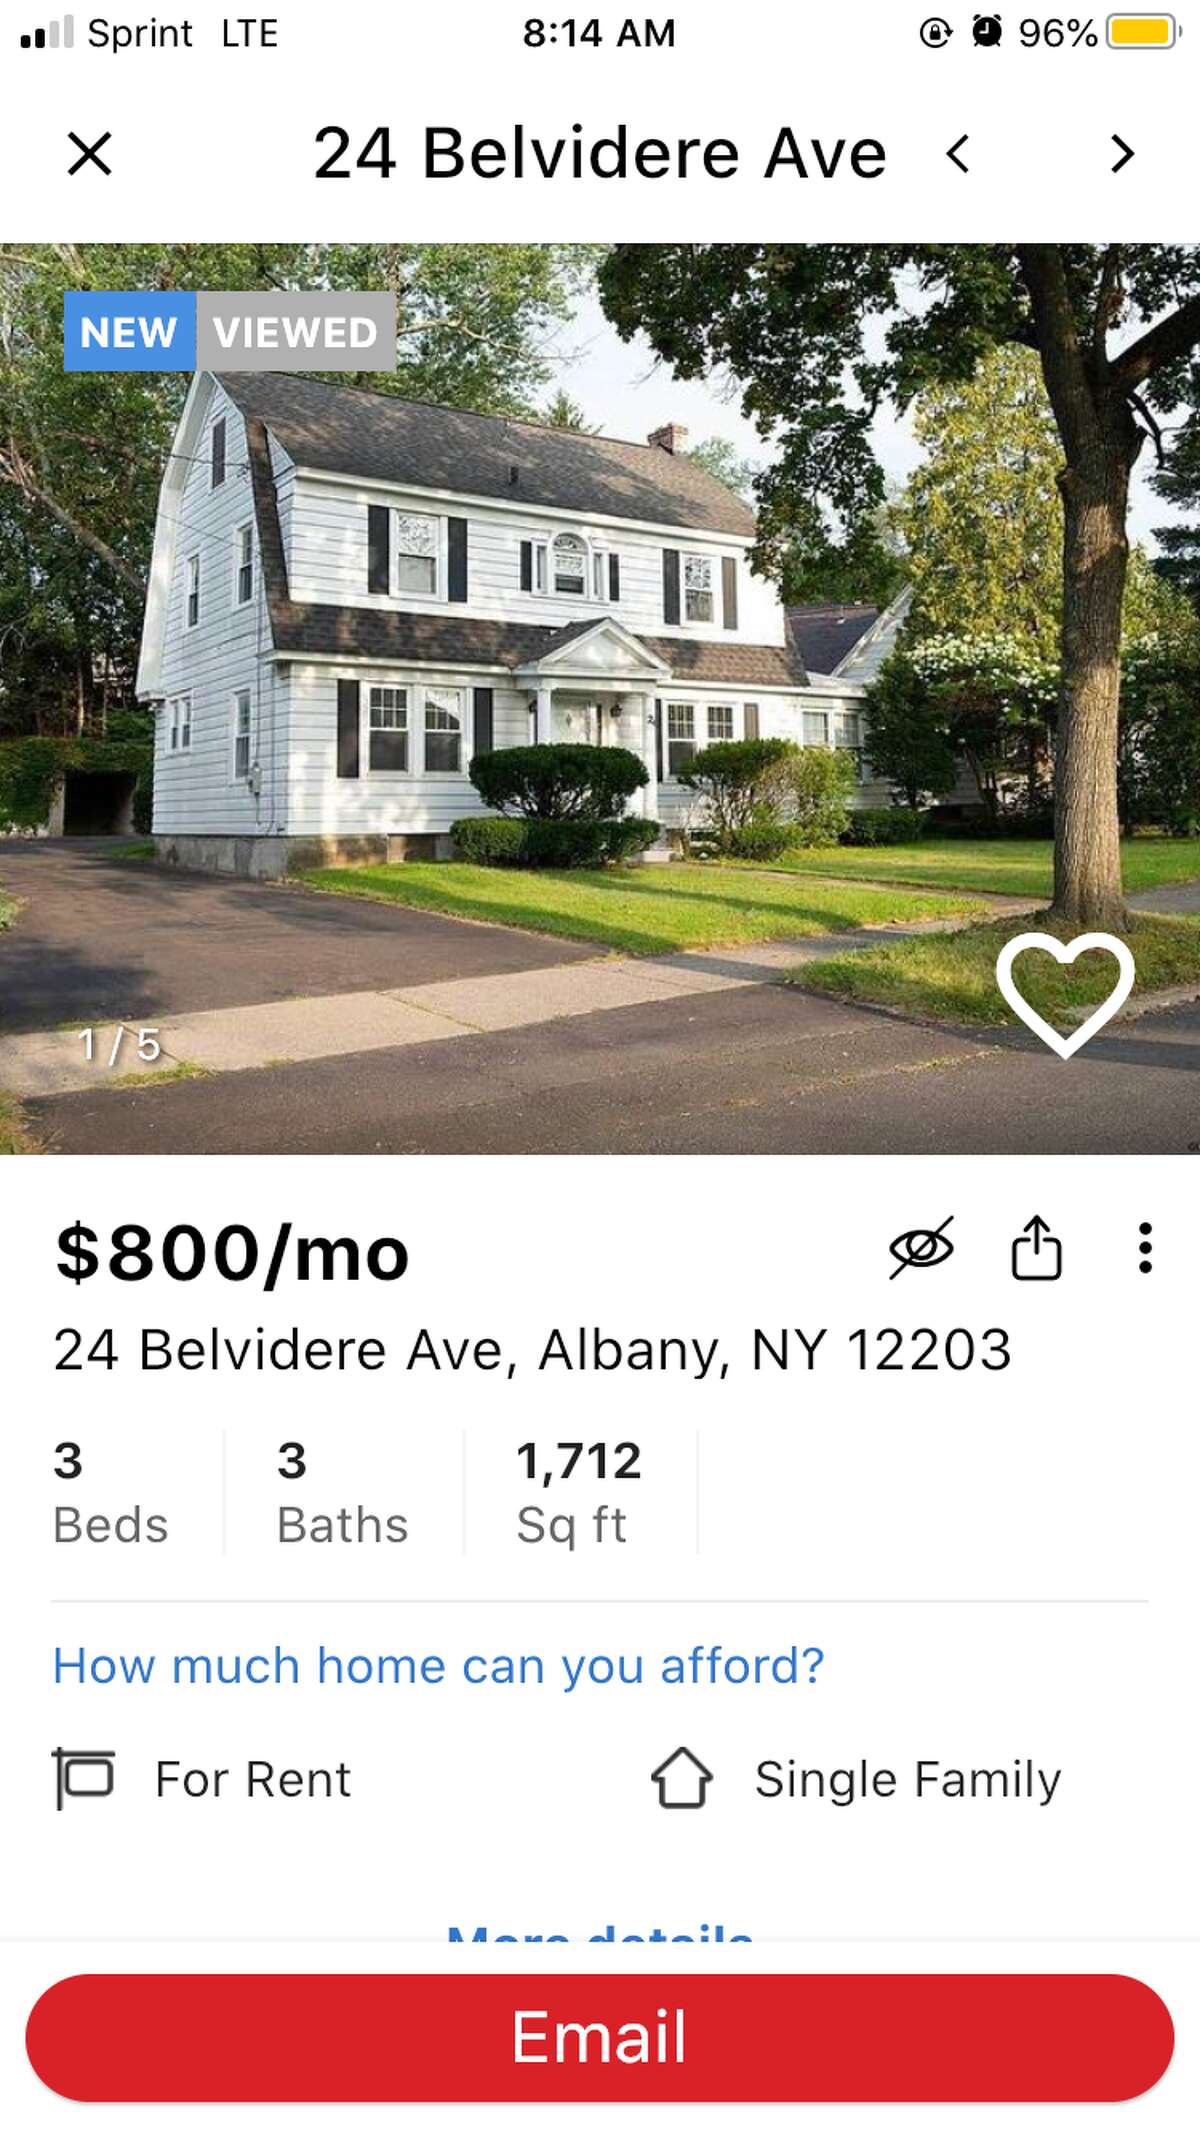 Screenshot of the fake listing on Zillow.com for 24 Belvidere Avenue.